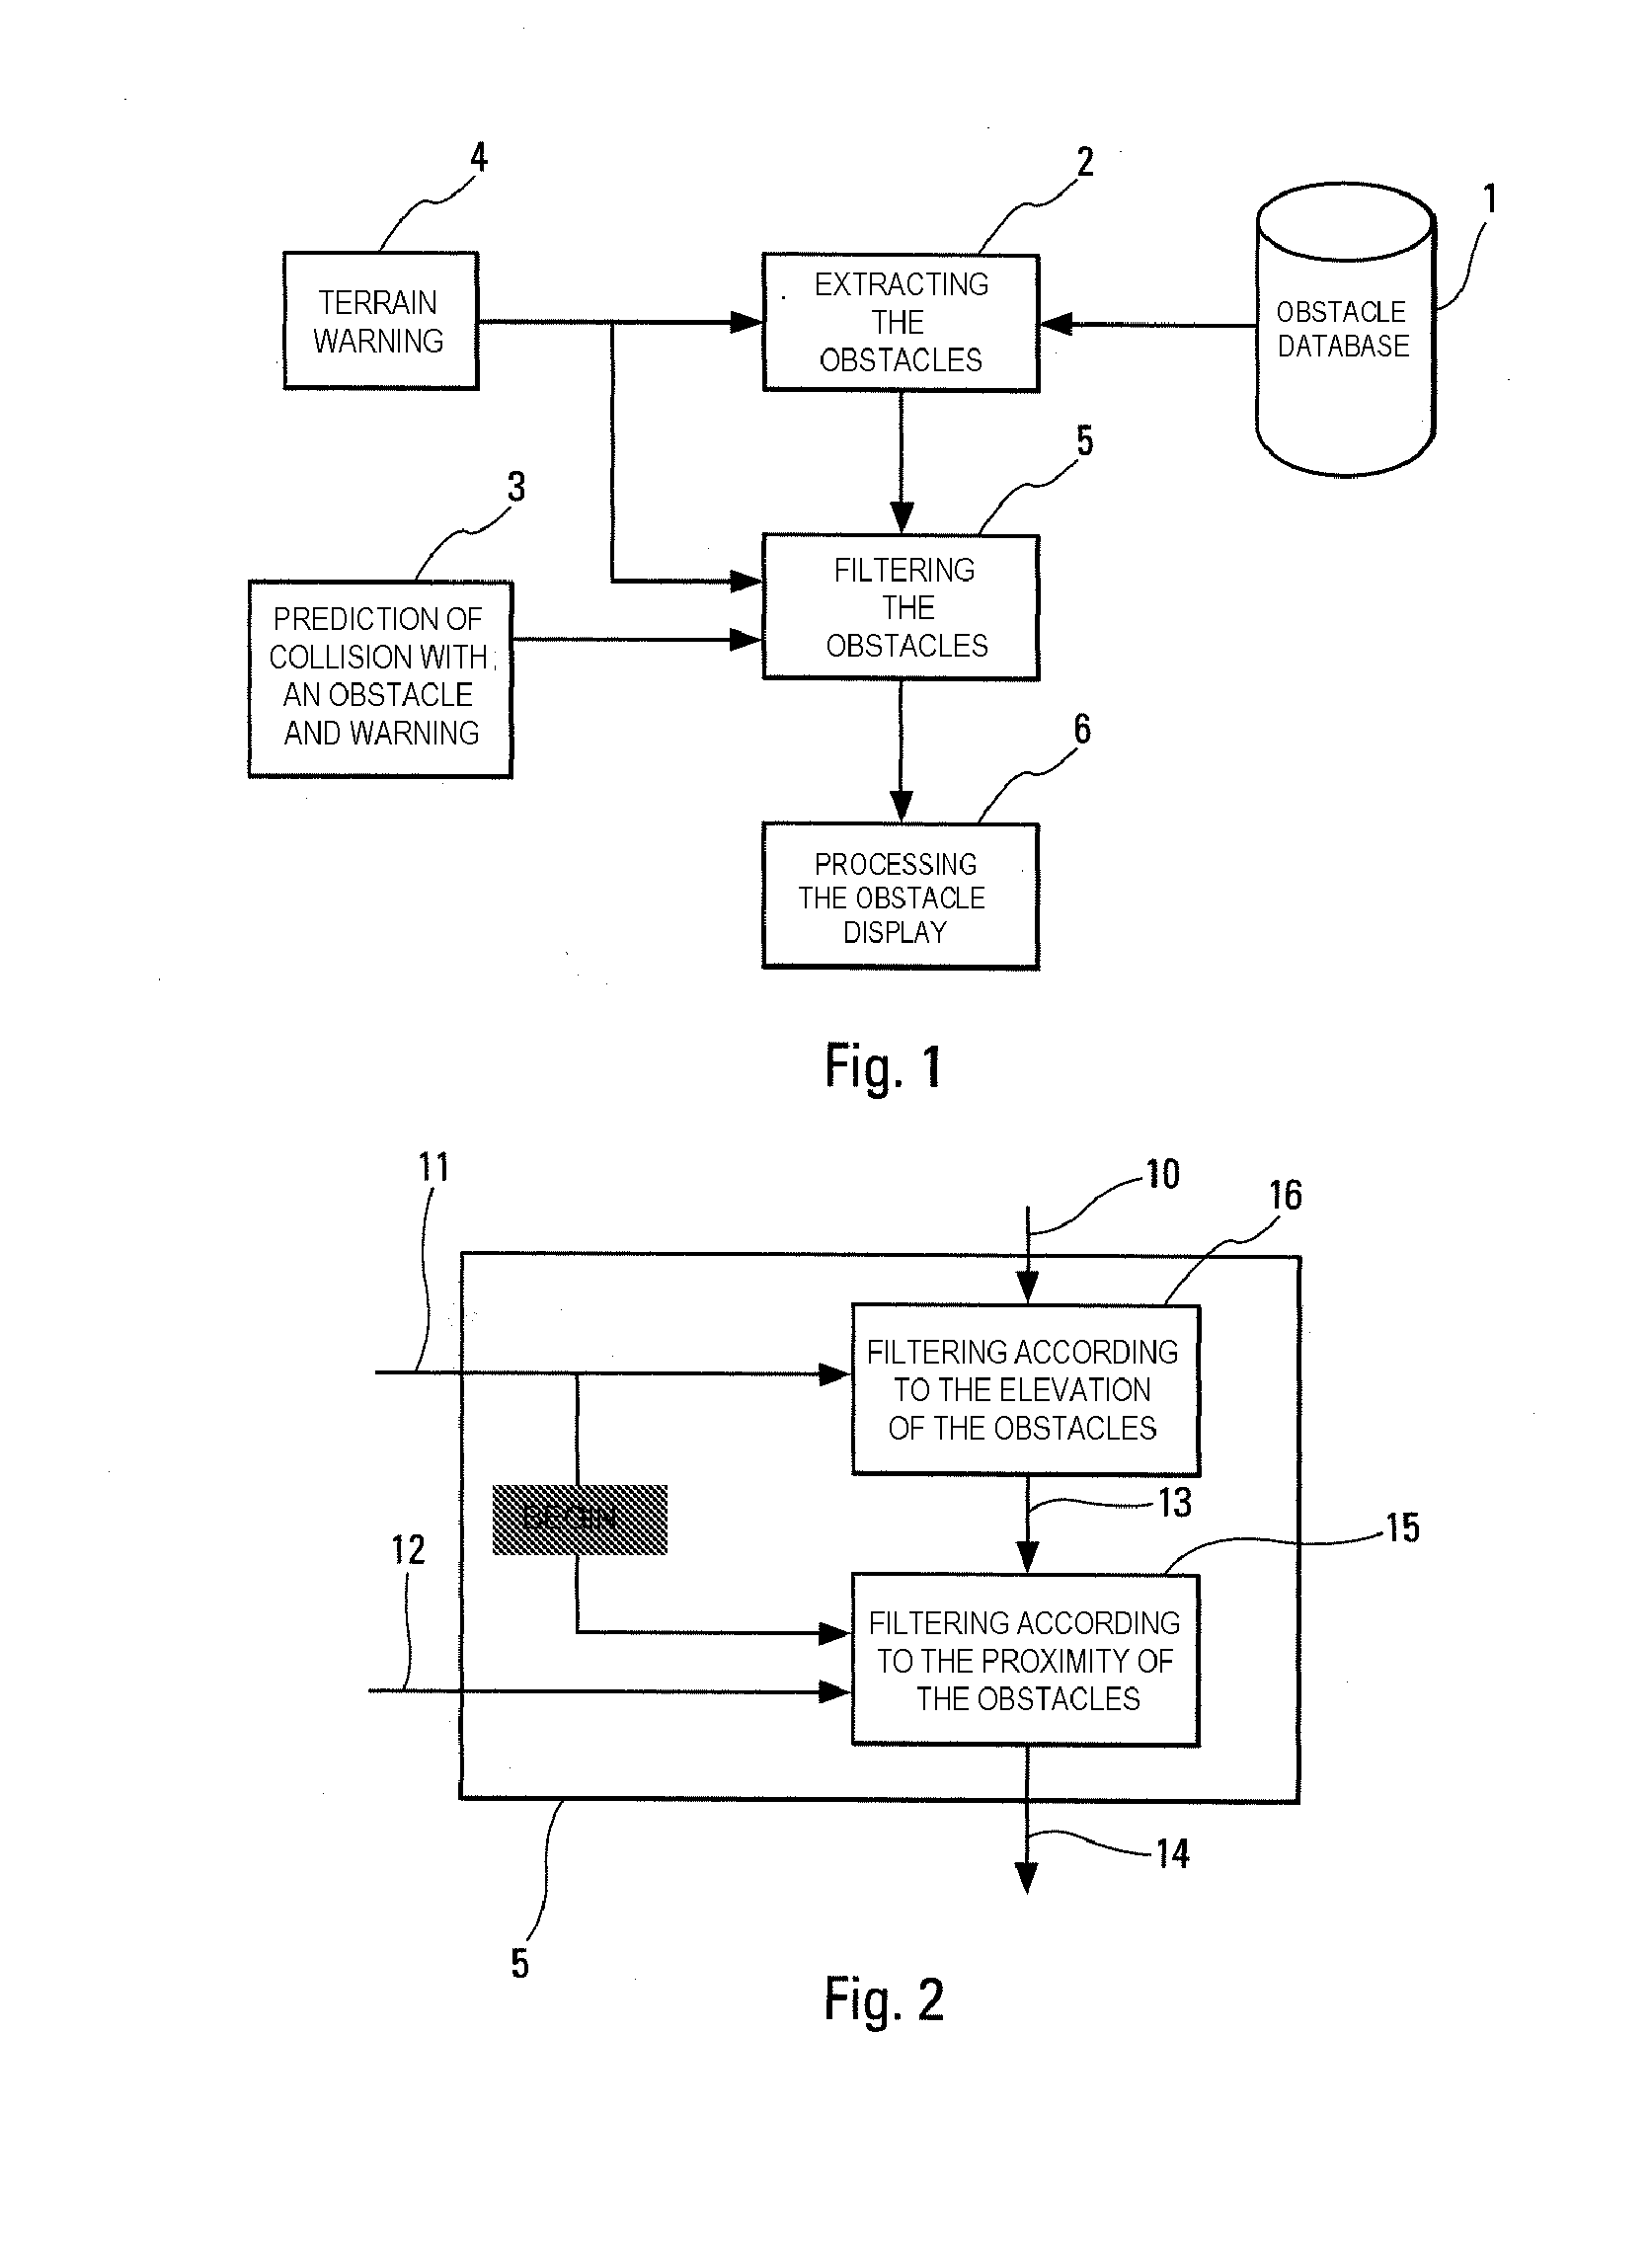 Method for Optimizng the Display of Data Relating to the Risks Presented by Obstacles